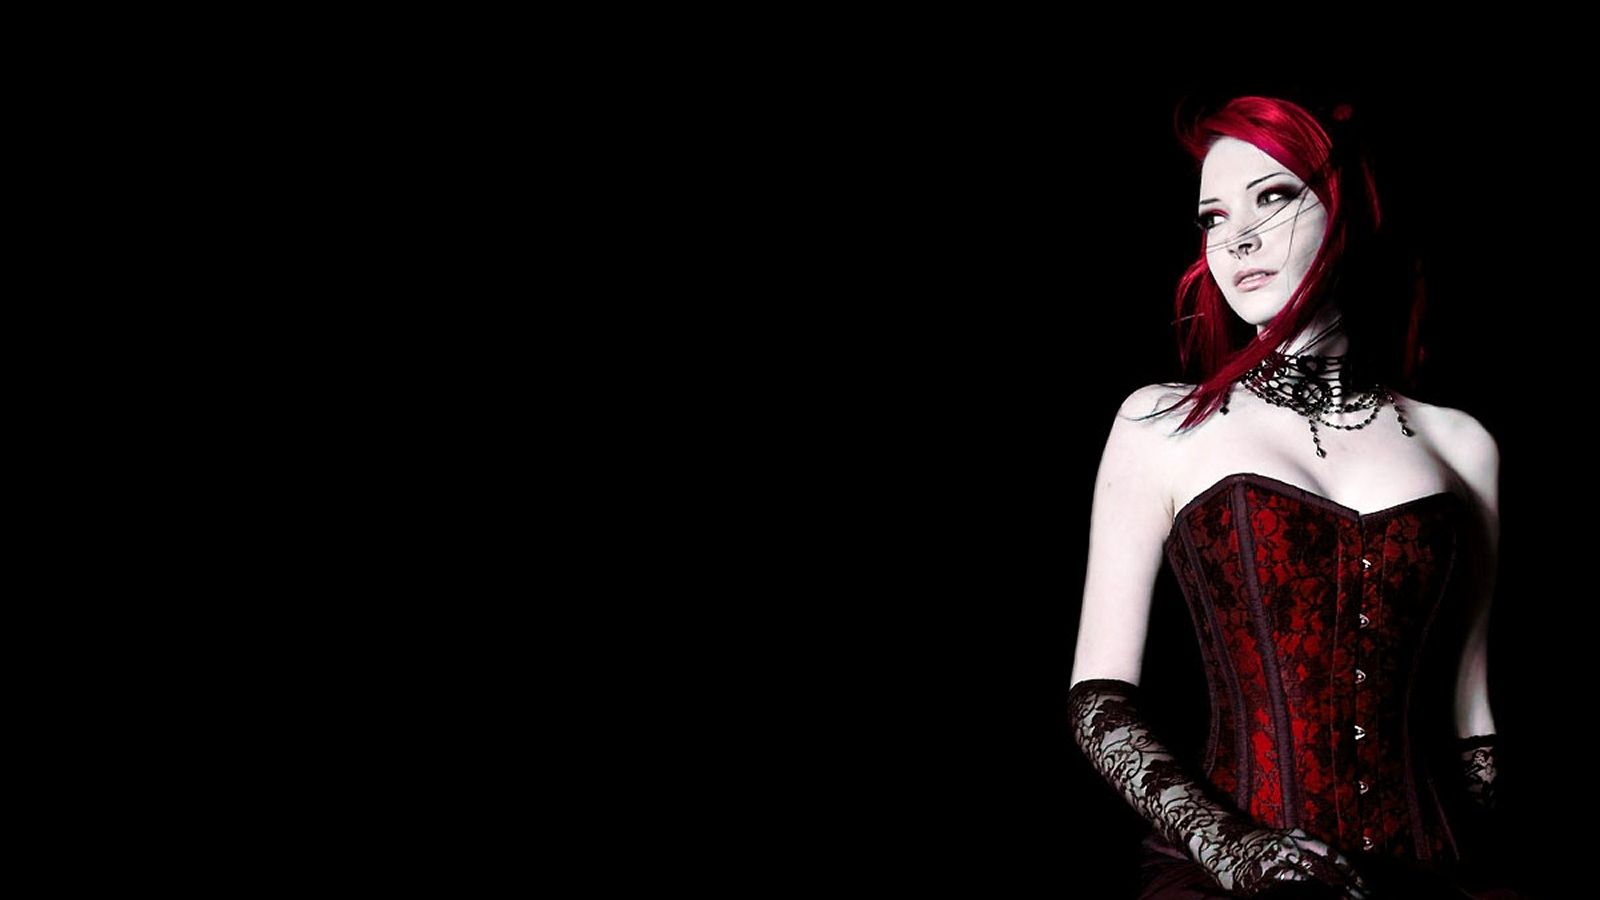 Free download Gothic Girl Wallpapers Red Gothic Girl Wallpapers.